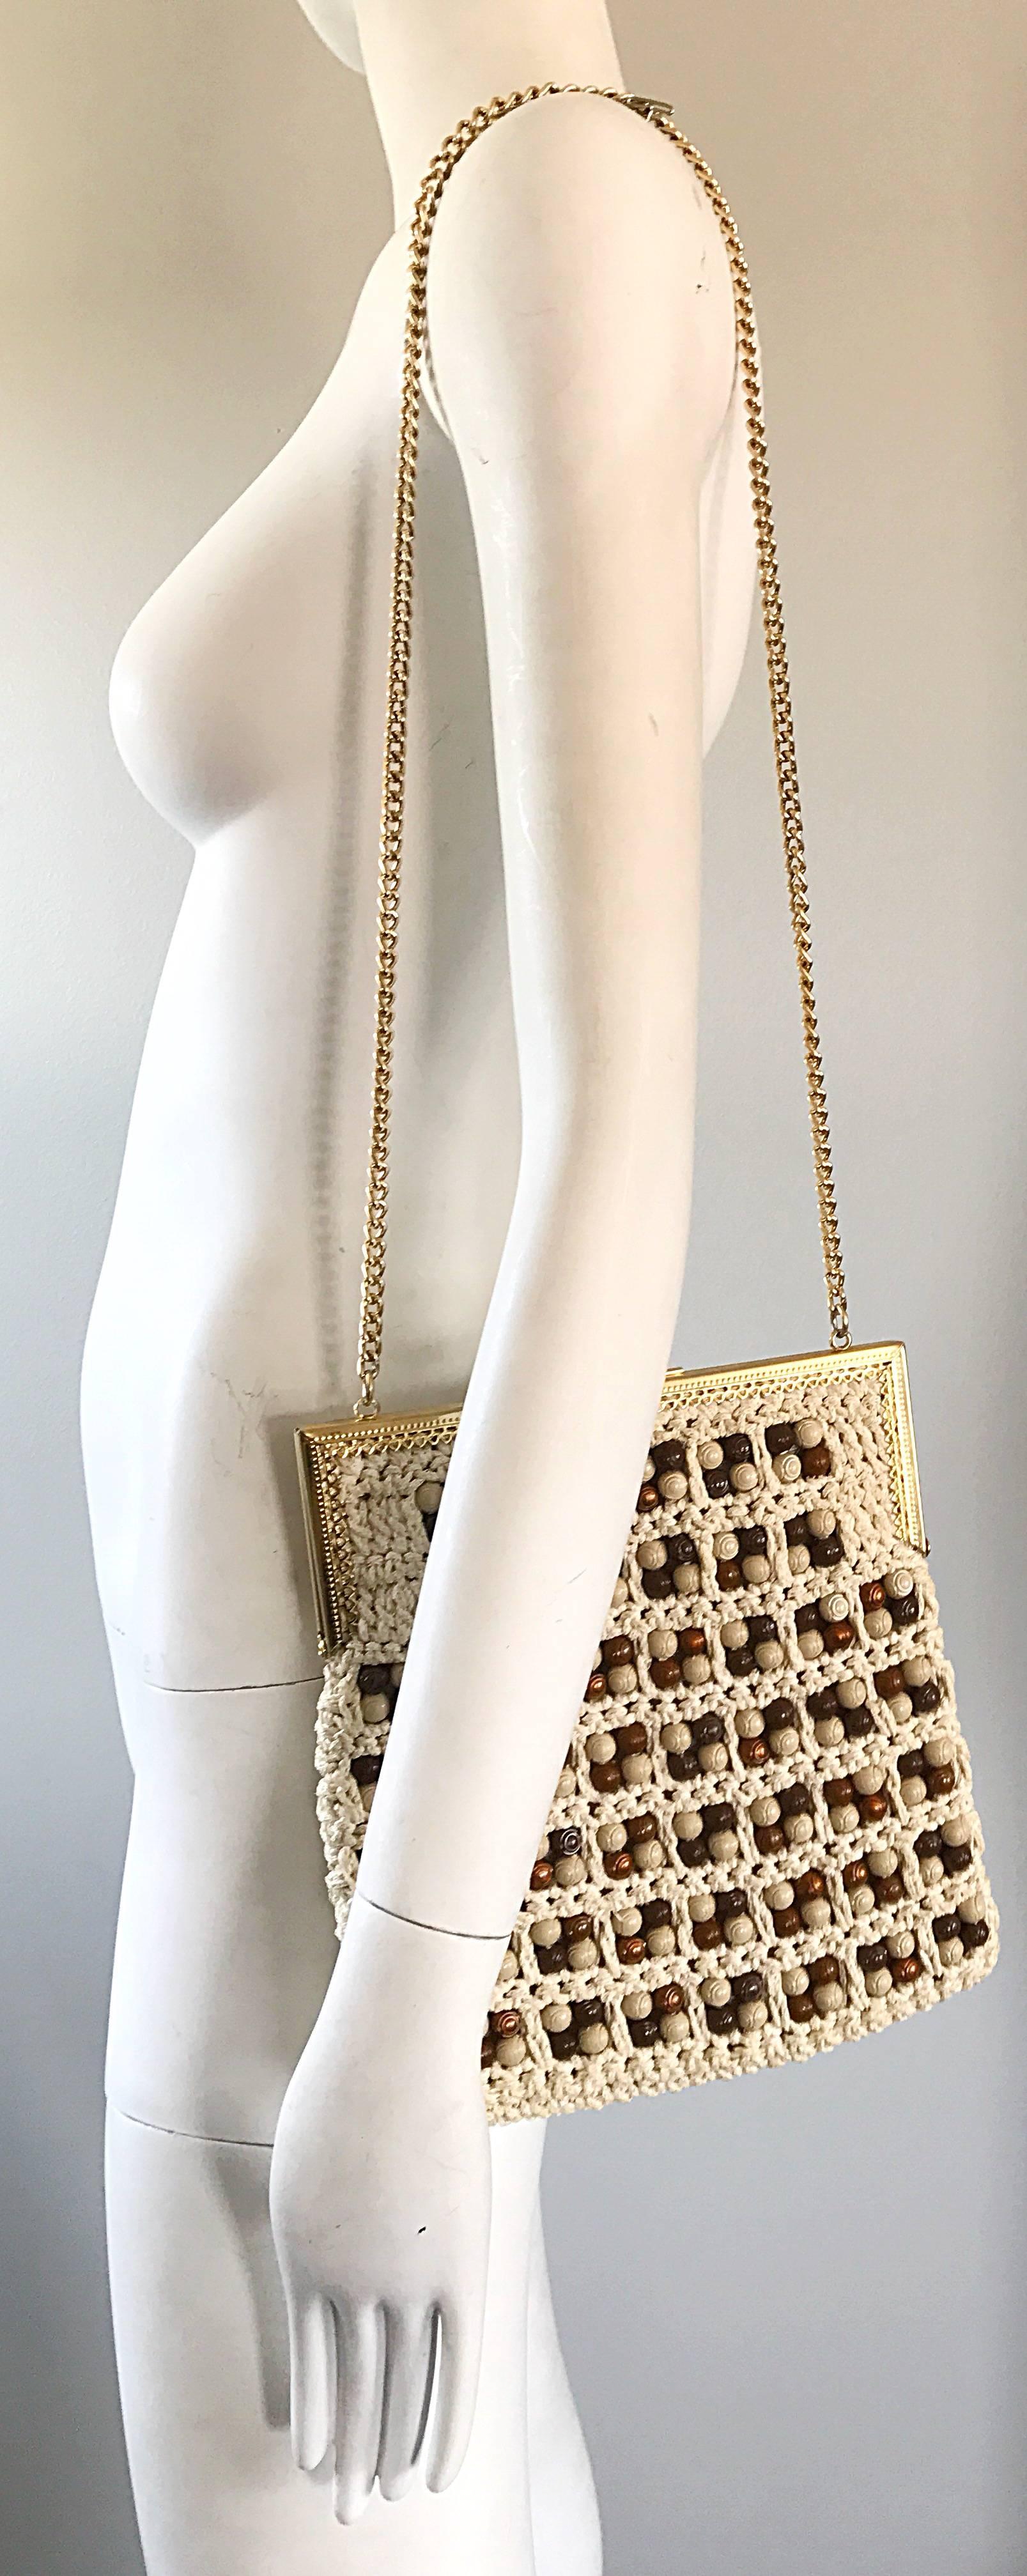 Chic 70s Italian ivory / white and brown hand crochet boho shoulder handbag! Features hundreds of brown wood looking beads on each side. The perfect size to fit all the essentials (smartphone, wallet, makeup, etc. Secure clasp closure. Gold chain